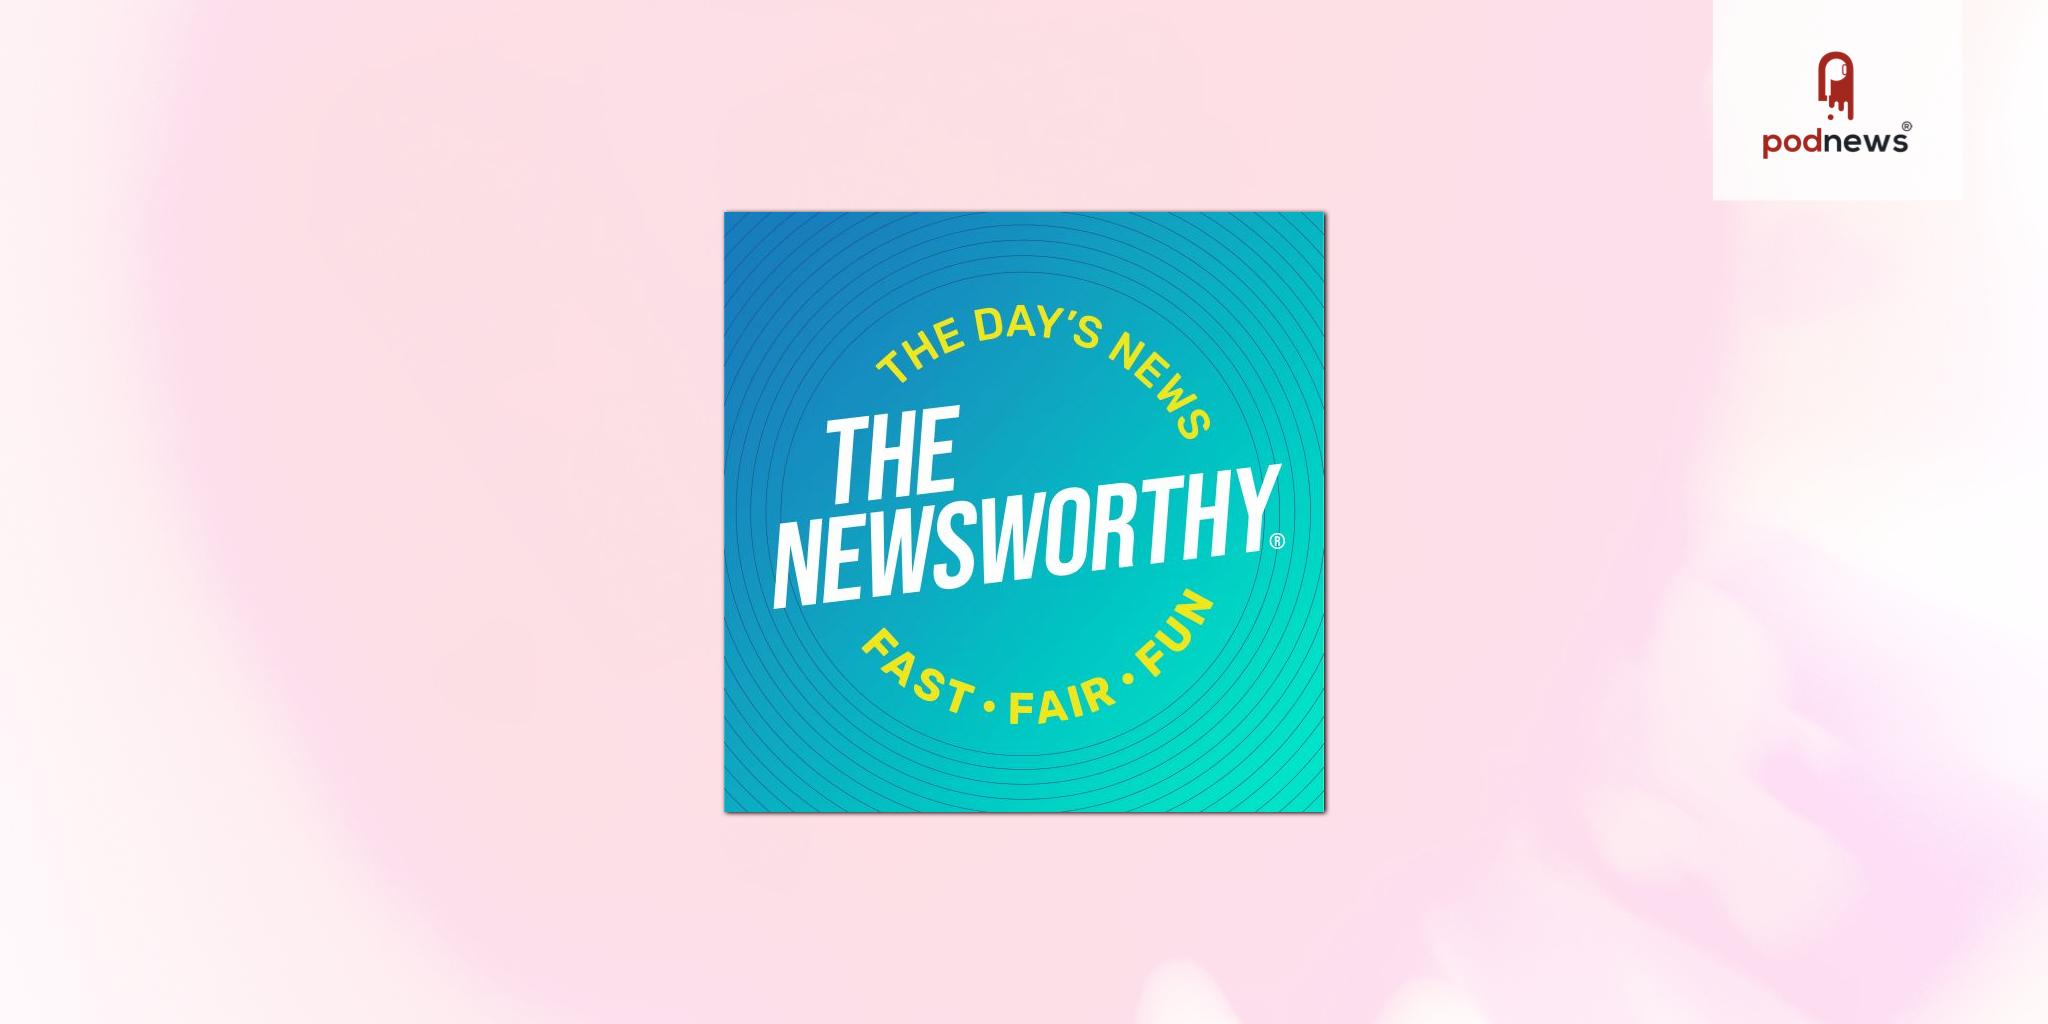 Libsyn’s AdvertiseCast Reups Exclusive Ad Partnership with The Newsworthy, the Daily News Podcast